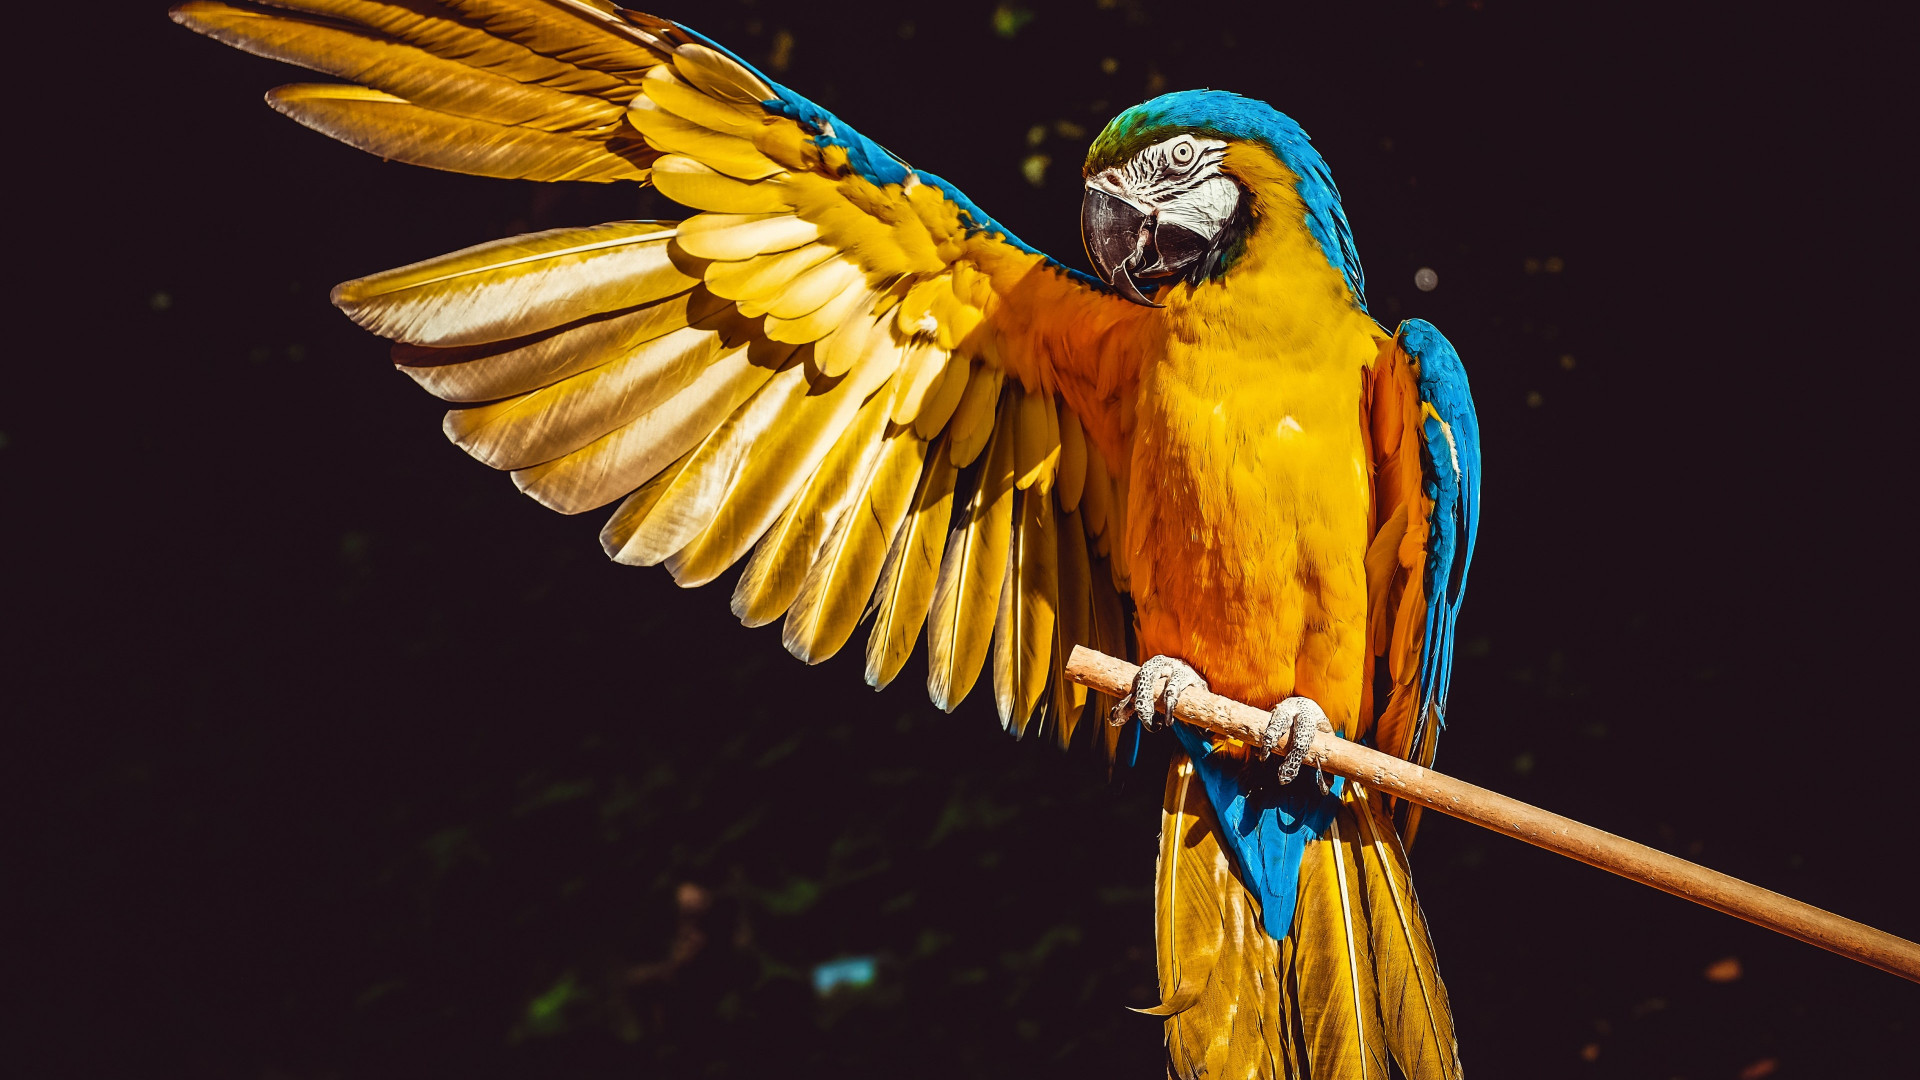 Blue and yellow macaw wallpaper 1920x1080